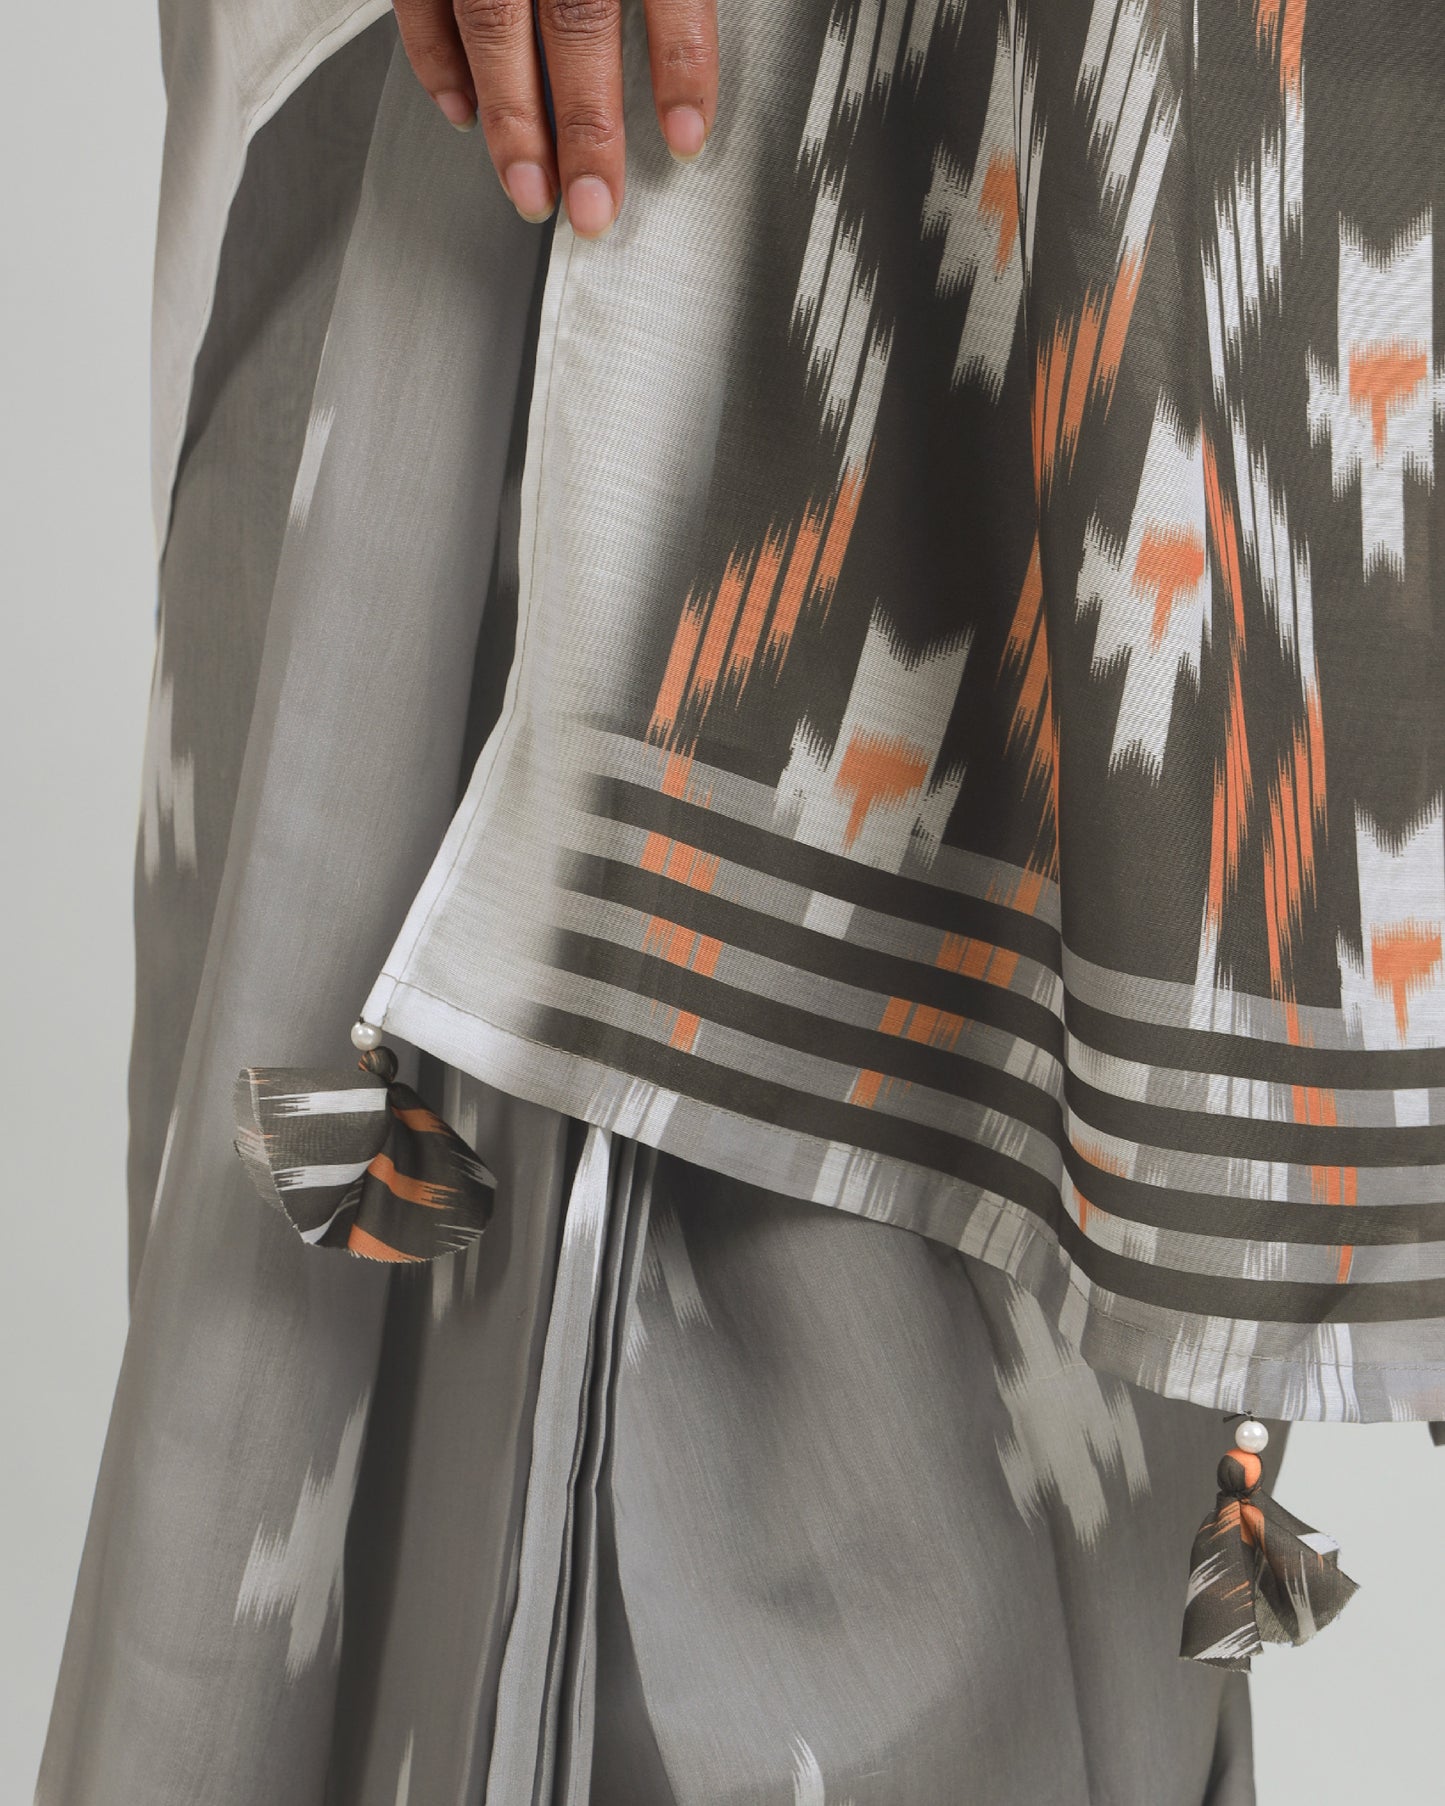 A Legacy in Every Thread: The Pre-Draped Ikat Print Saree